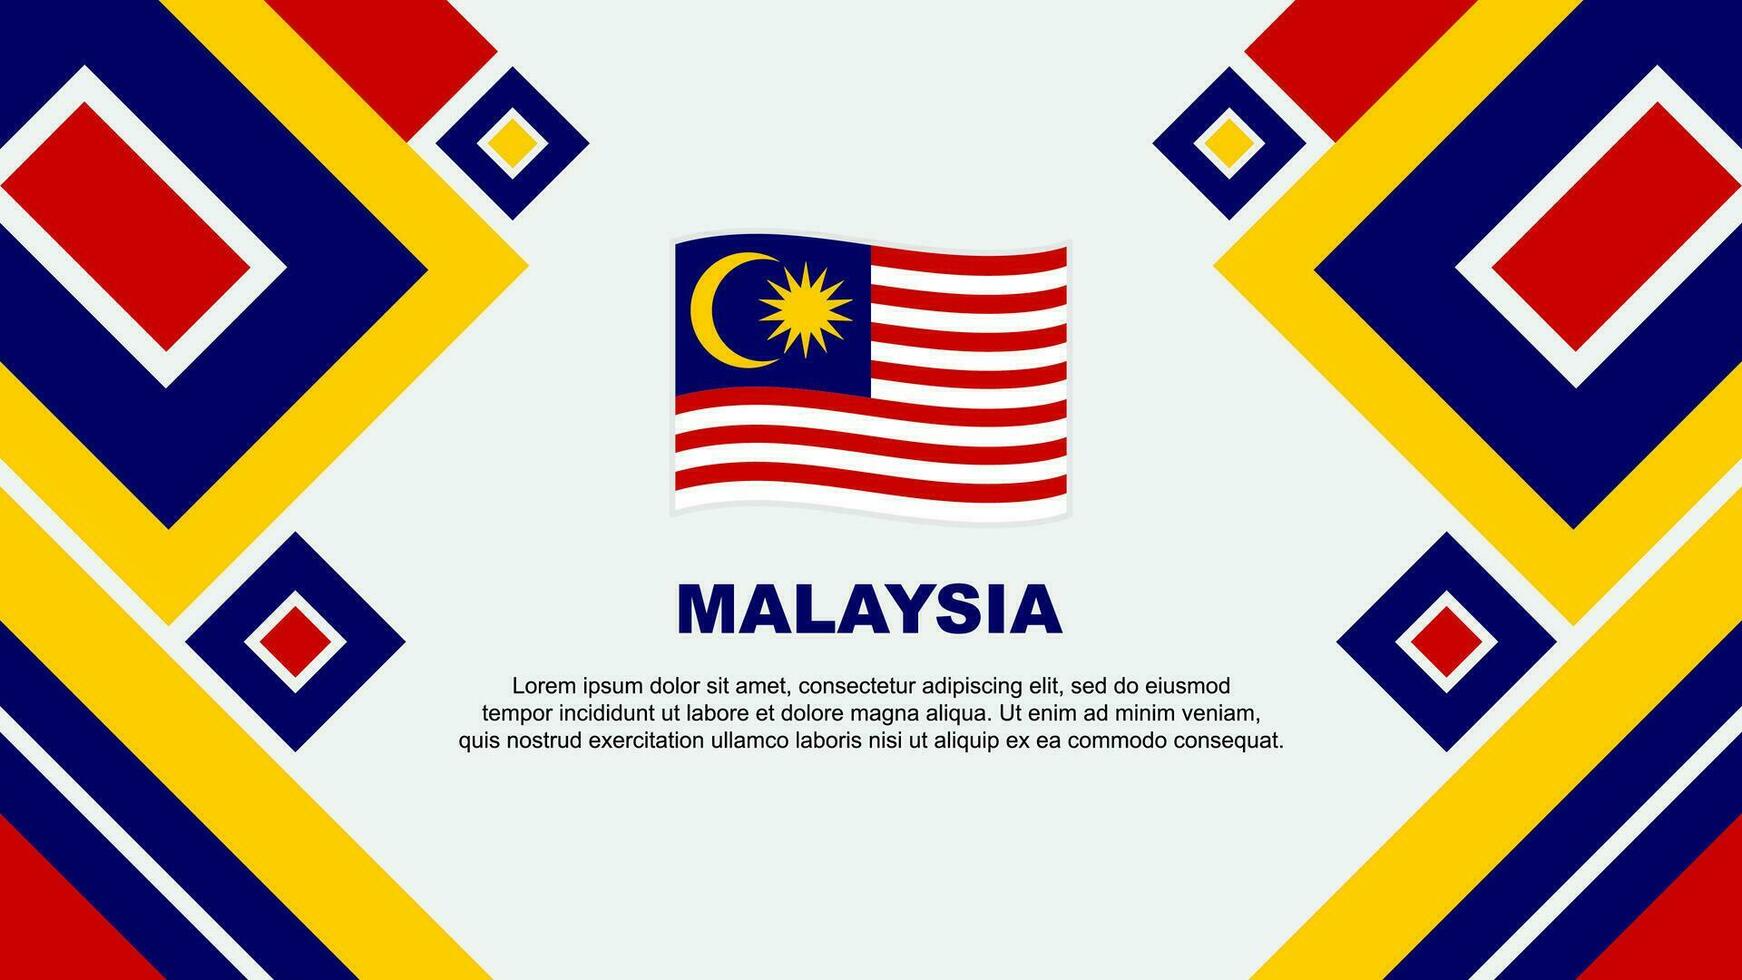 Malaysia Flag Abstract Background Design Template. Malaysia Independence Day Banner Wallpaper Vector Illustration. Malaysia Cartoon